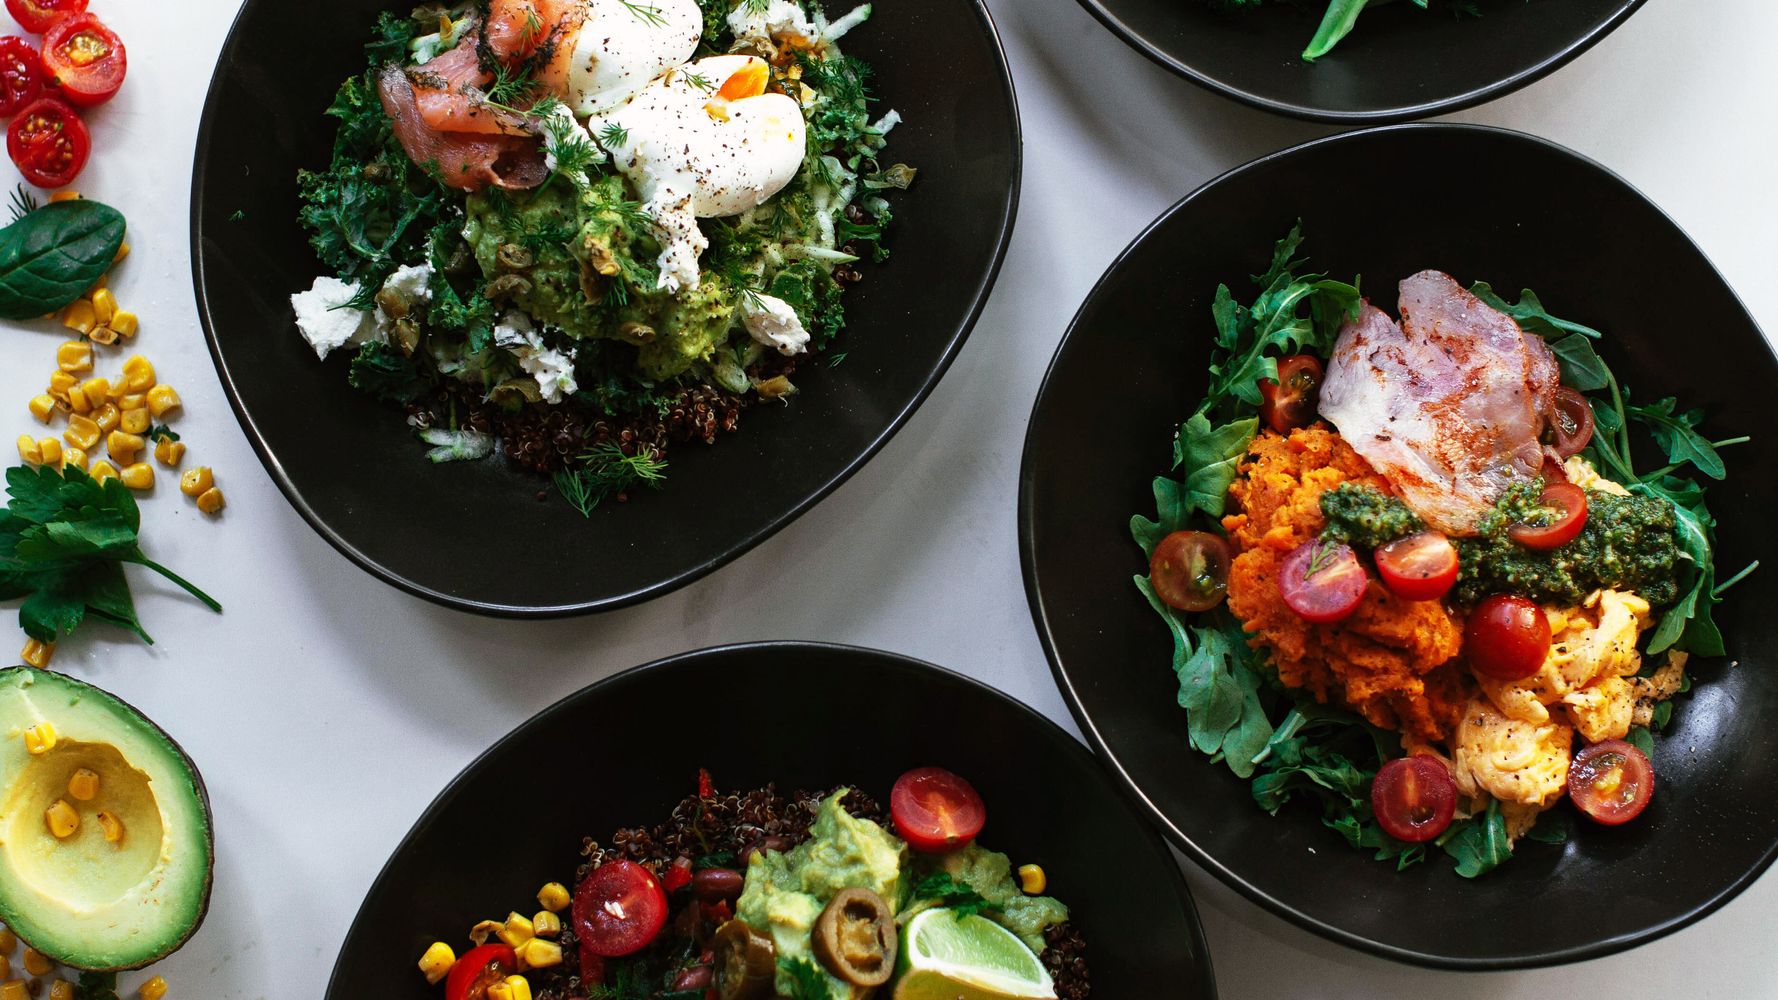 These Cafe-Style Bowl Recipes Make Healthy Eating Easy | HuffPost